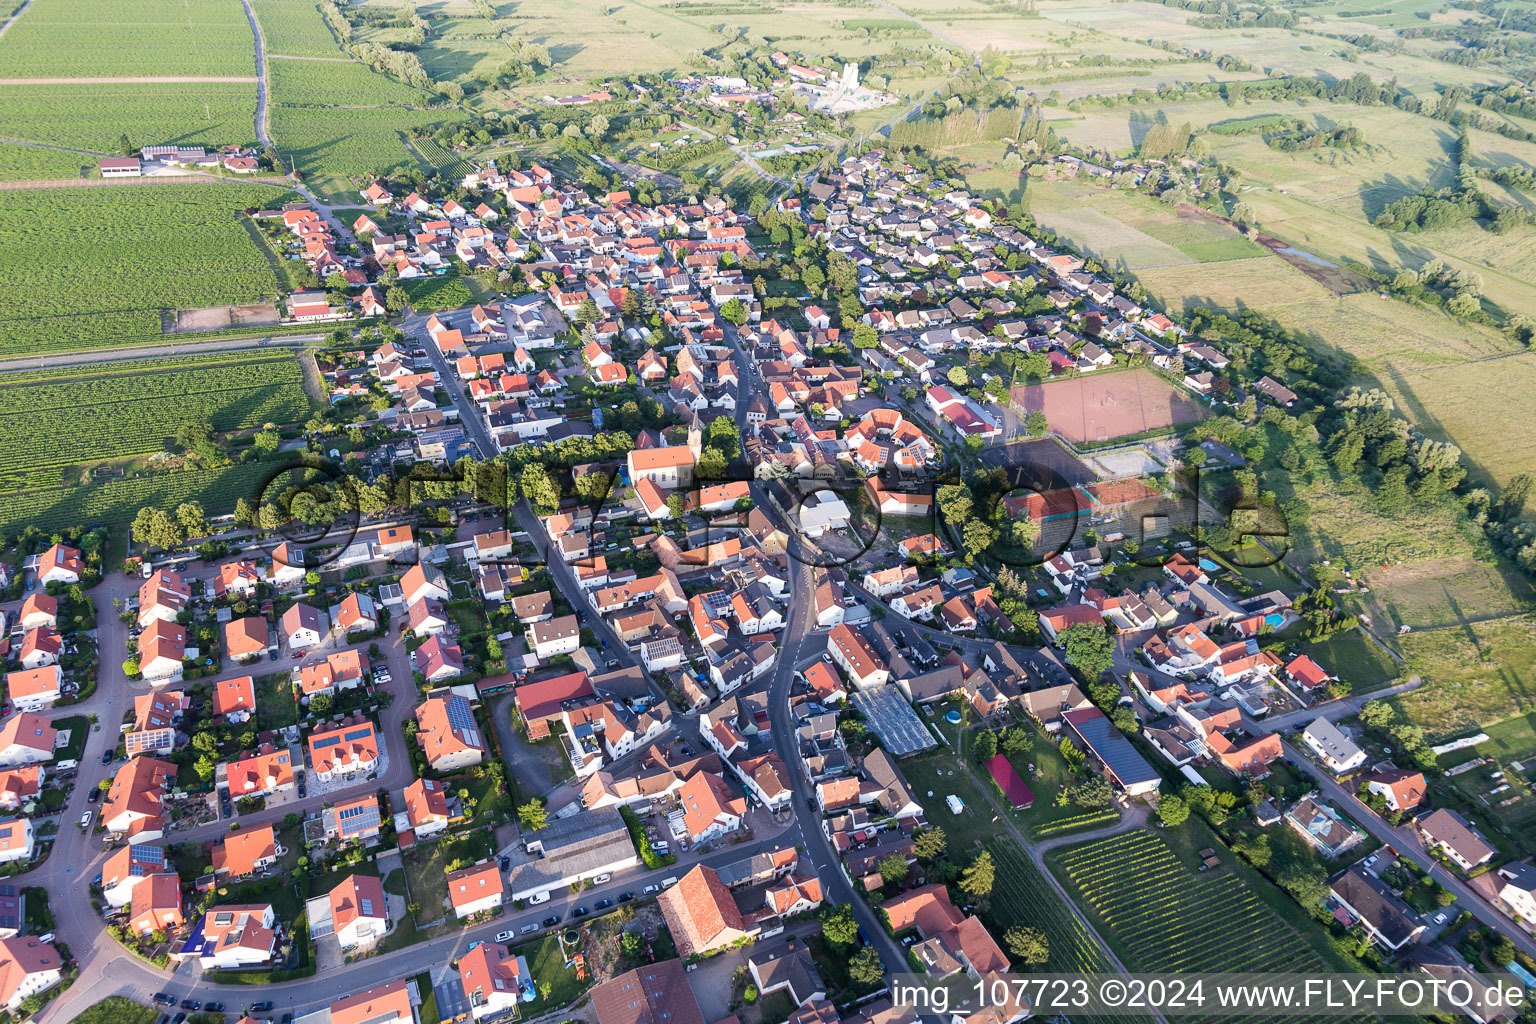 Agricultural land and field borders surround the settlement area of the village in Erpolzheim in the state Rhineland-Palatinate, Germany out of the air